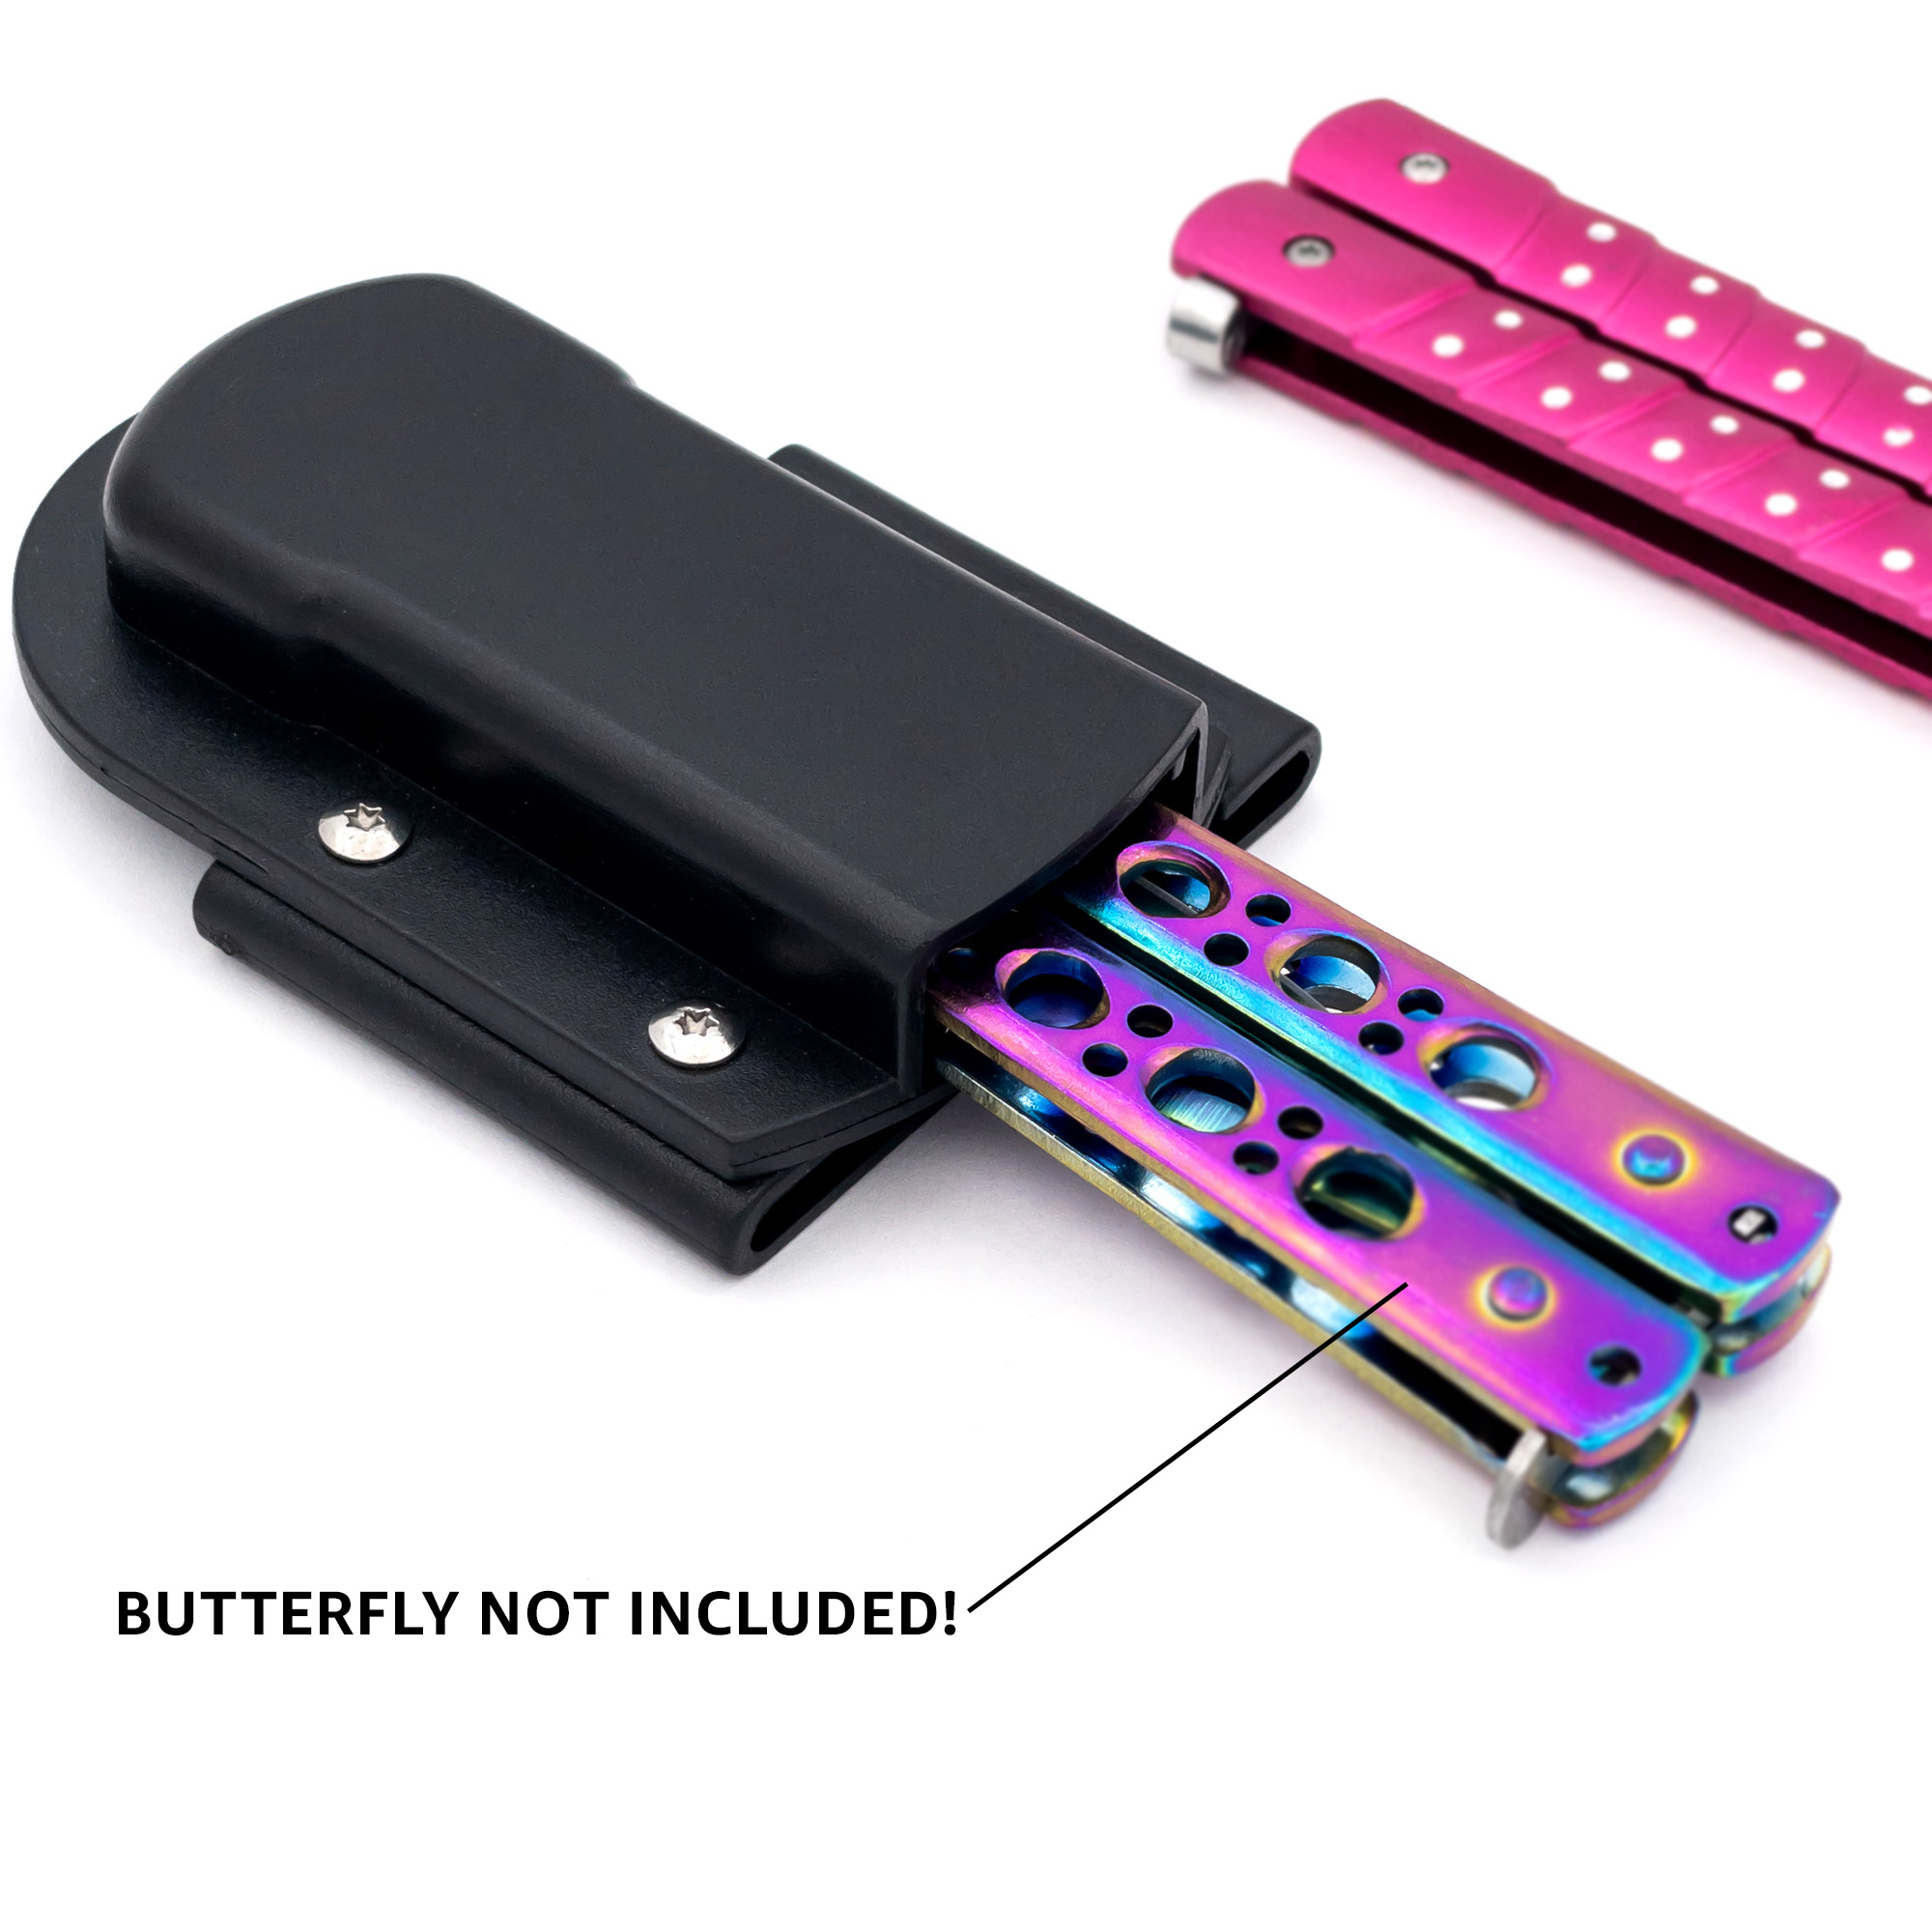 Calm for Now ABS Butterfly KNIFE Sheath Holster